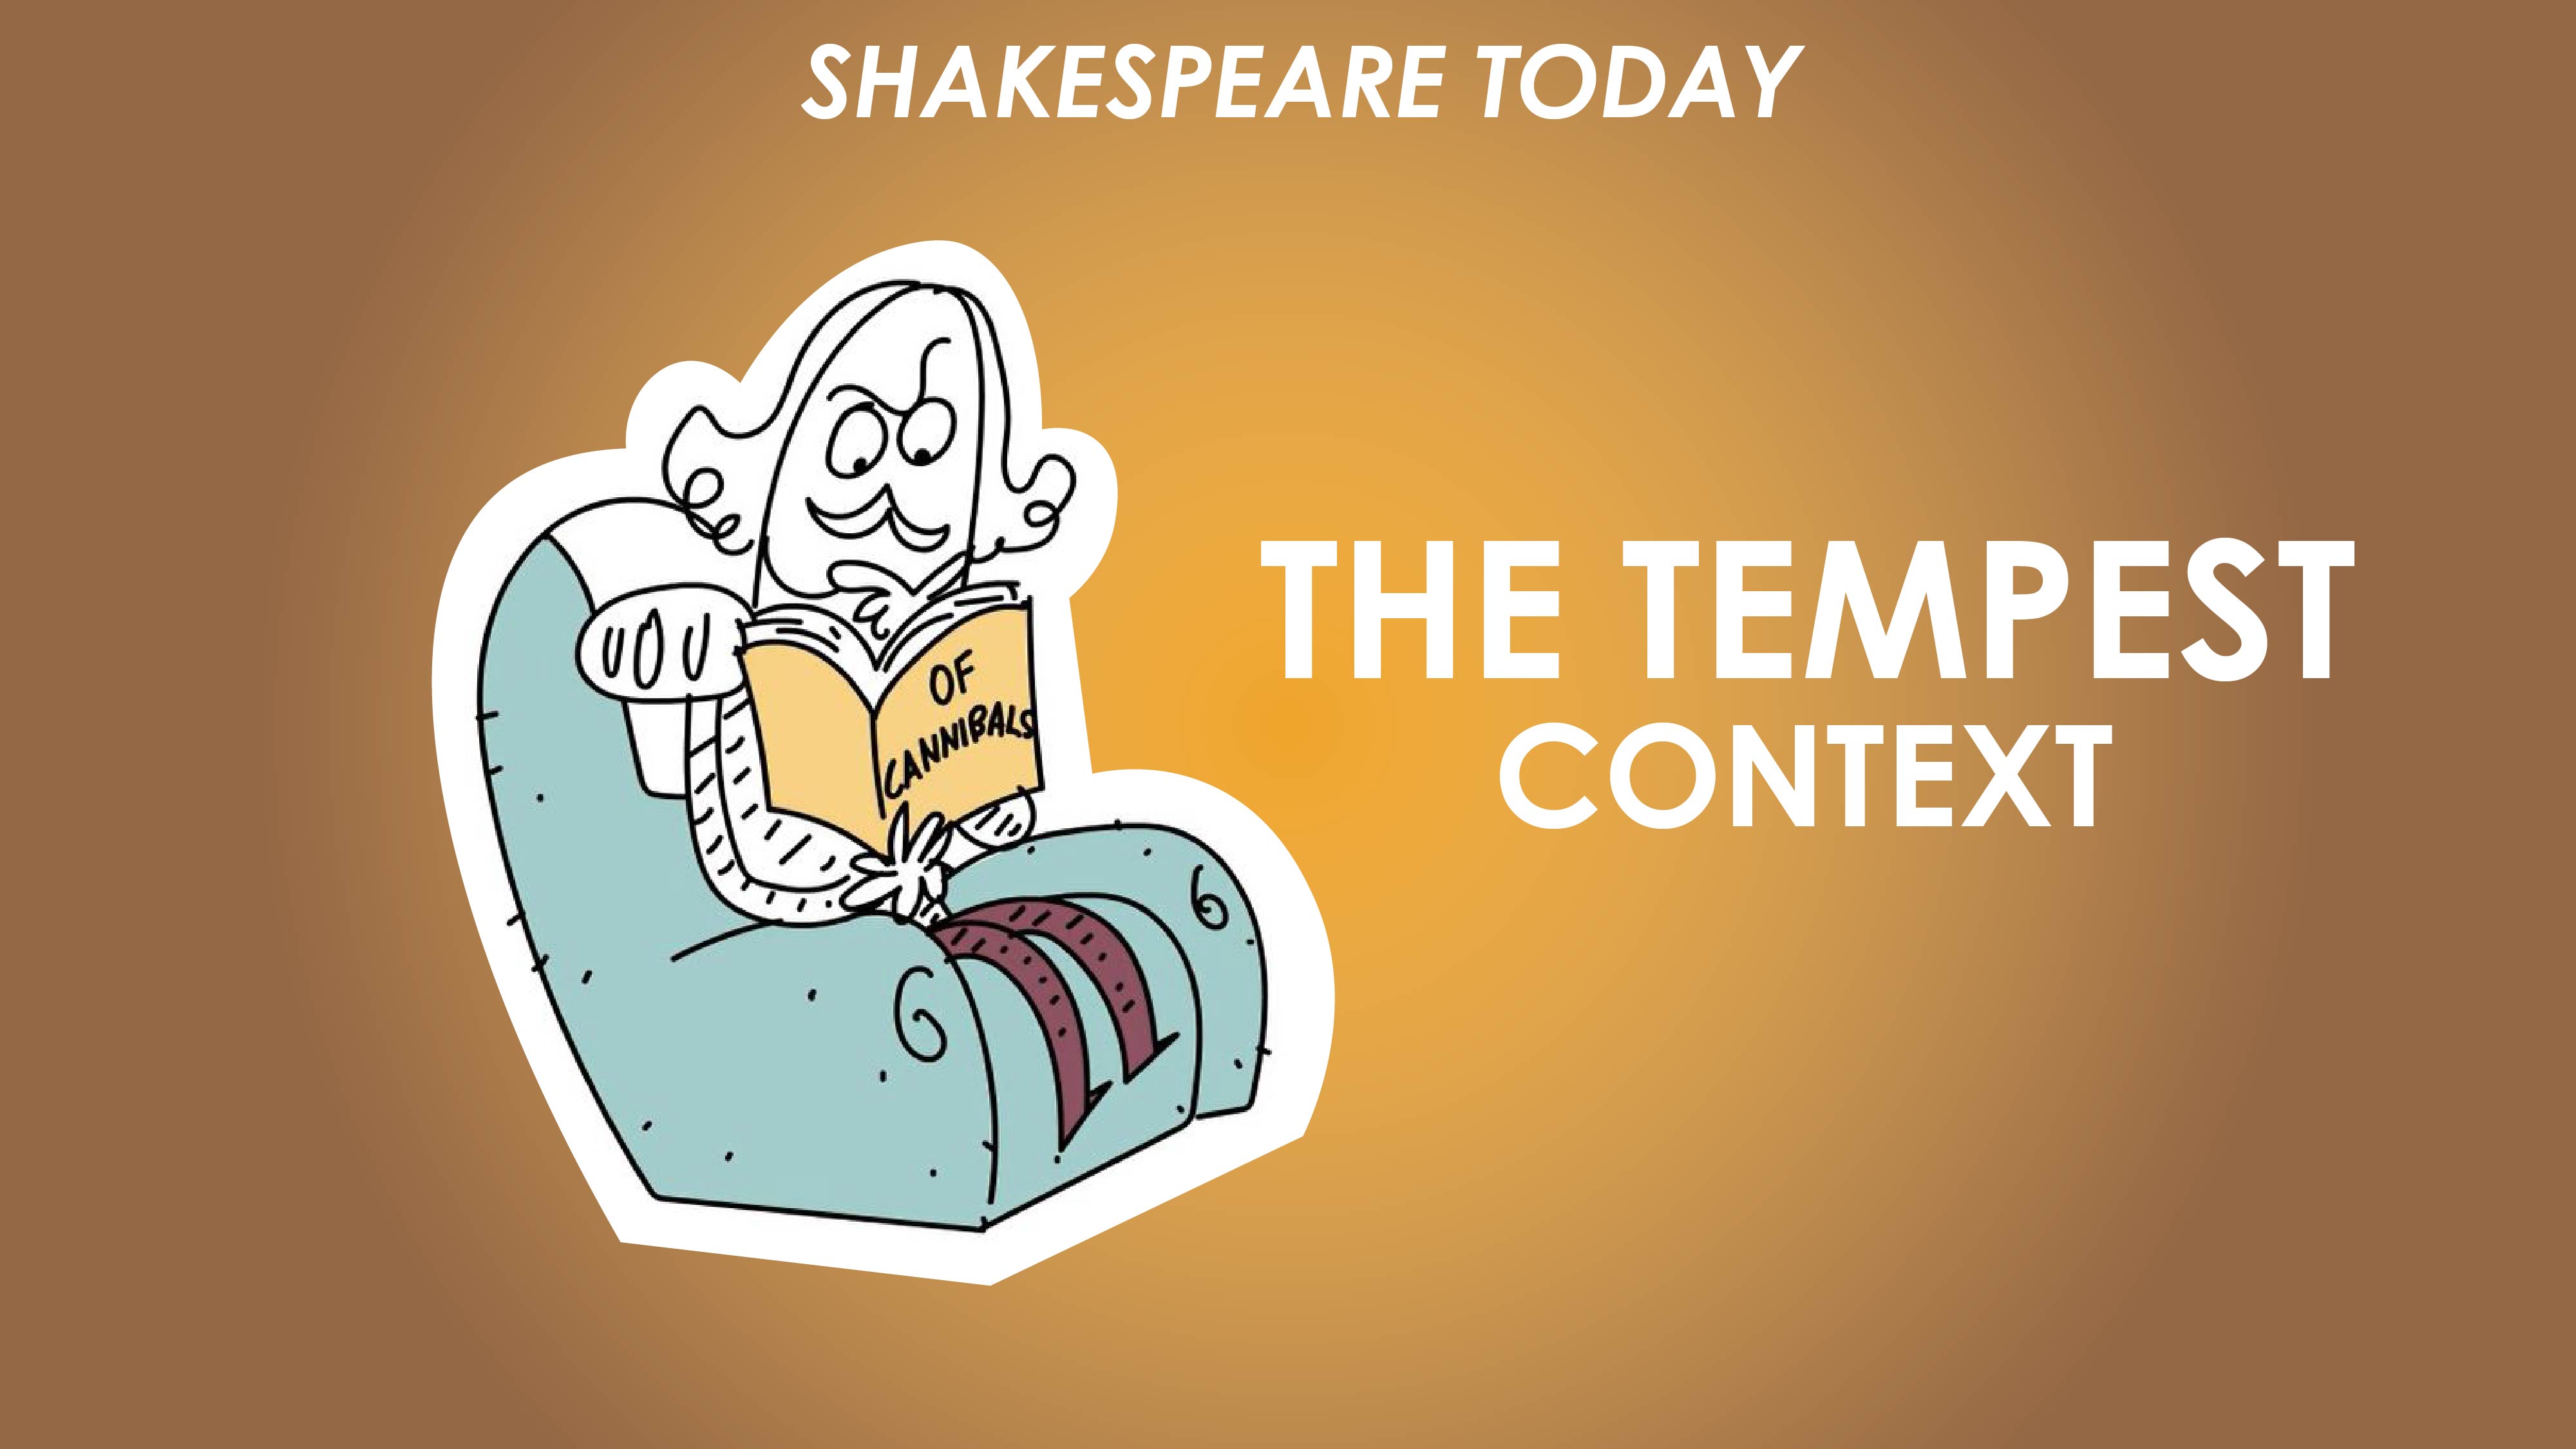 The Tempest Context - Shakespeare Today Series